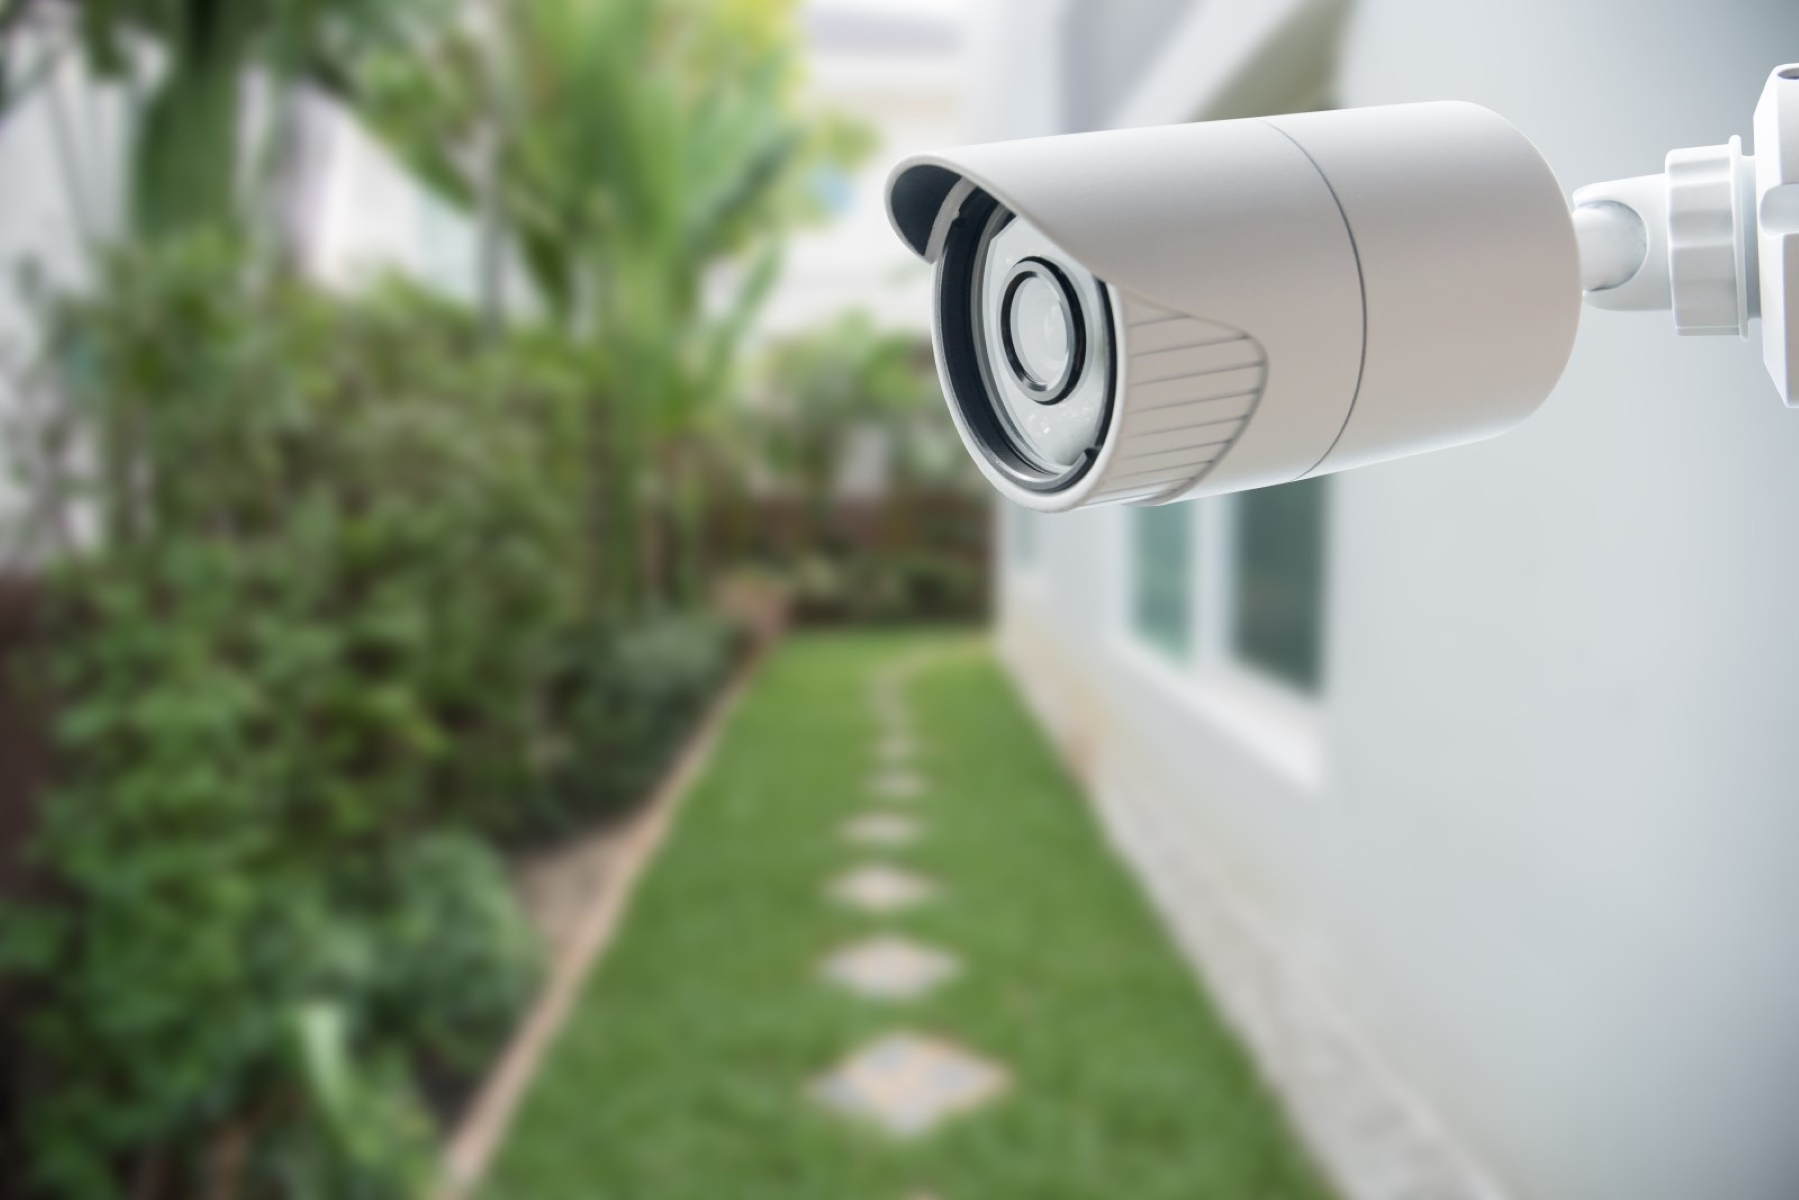 How To Find Out If CCTV Was Installed In Your Home